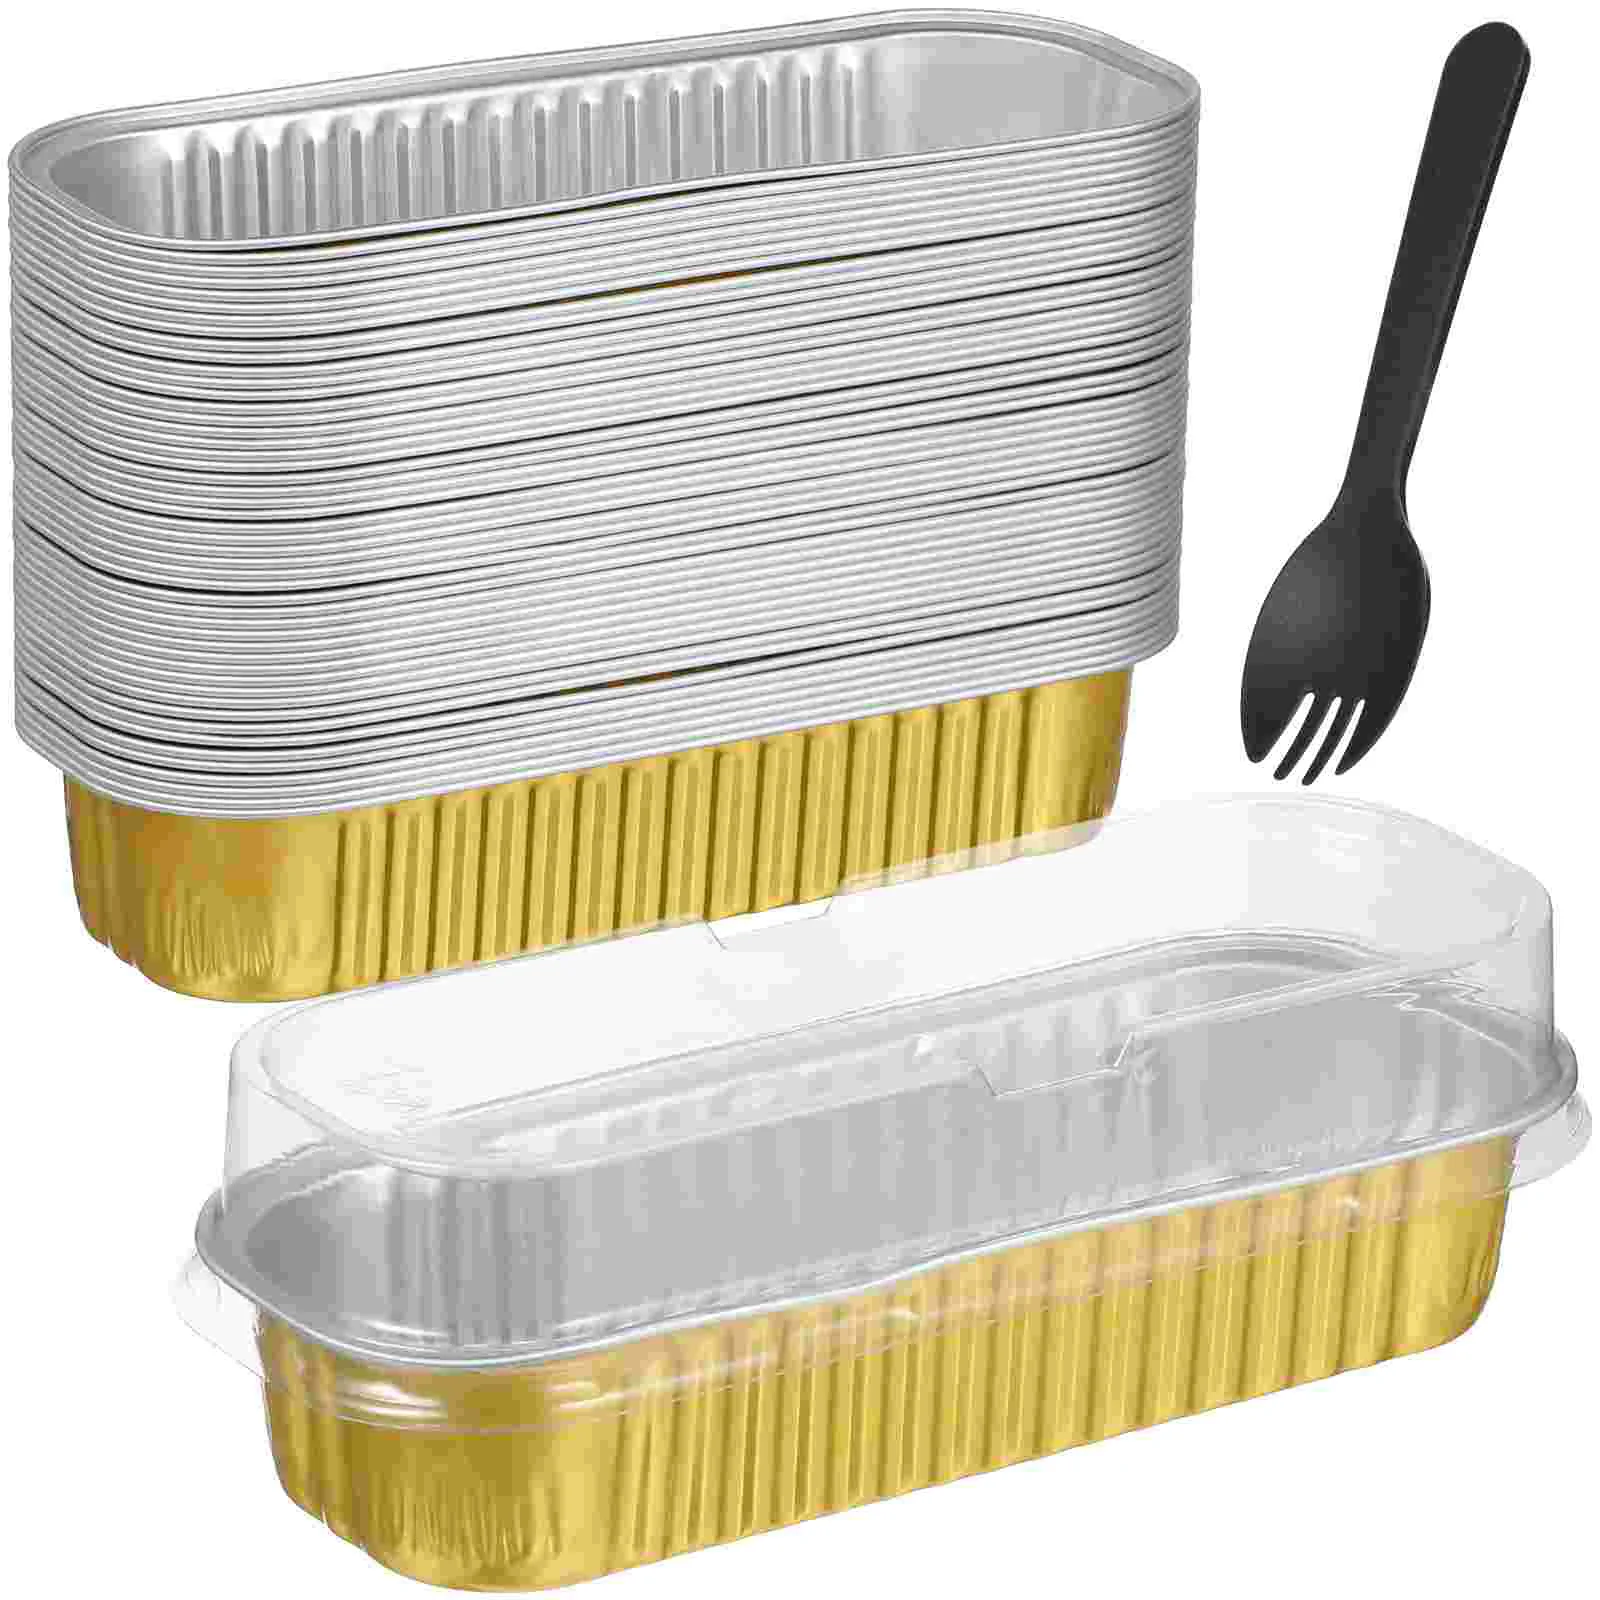 

50 Pcs Food Containers Loaf Compact Cake Baking Supplies Bread Pan Camping Aluminum Foil Accessories Mini Tins Pans